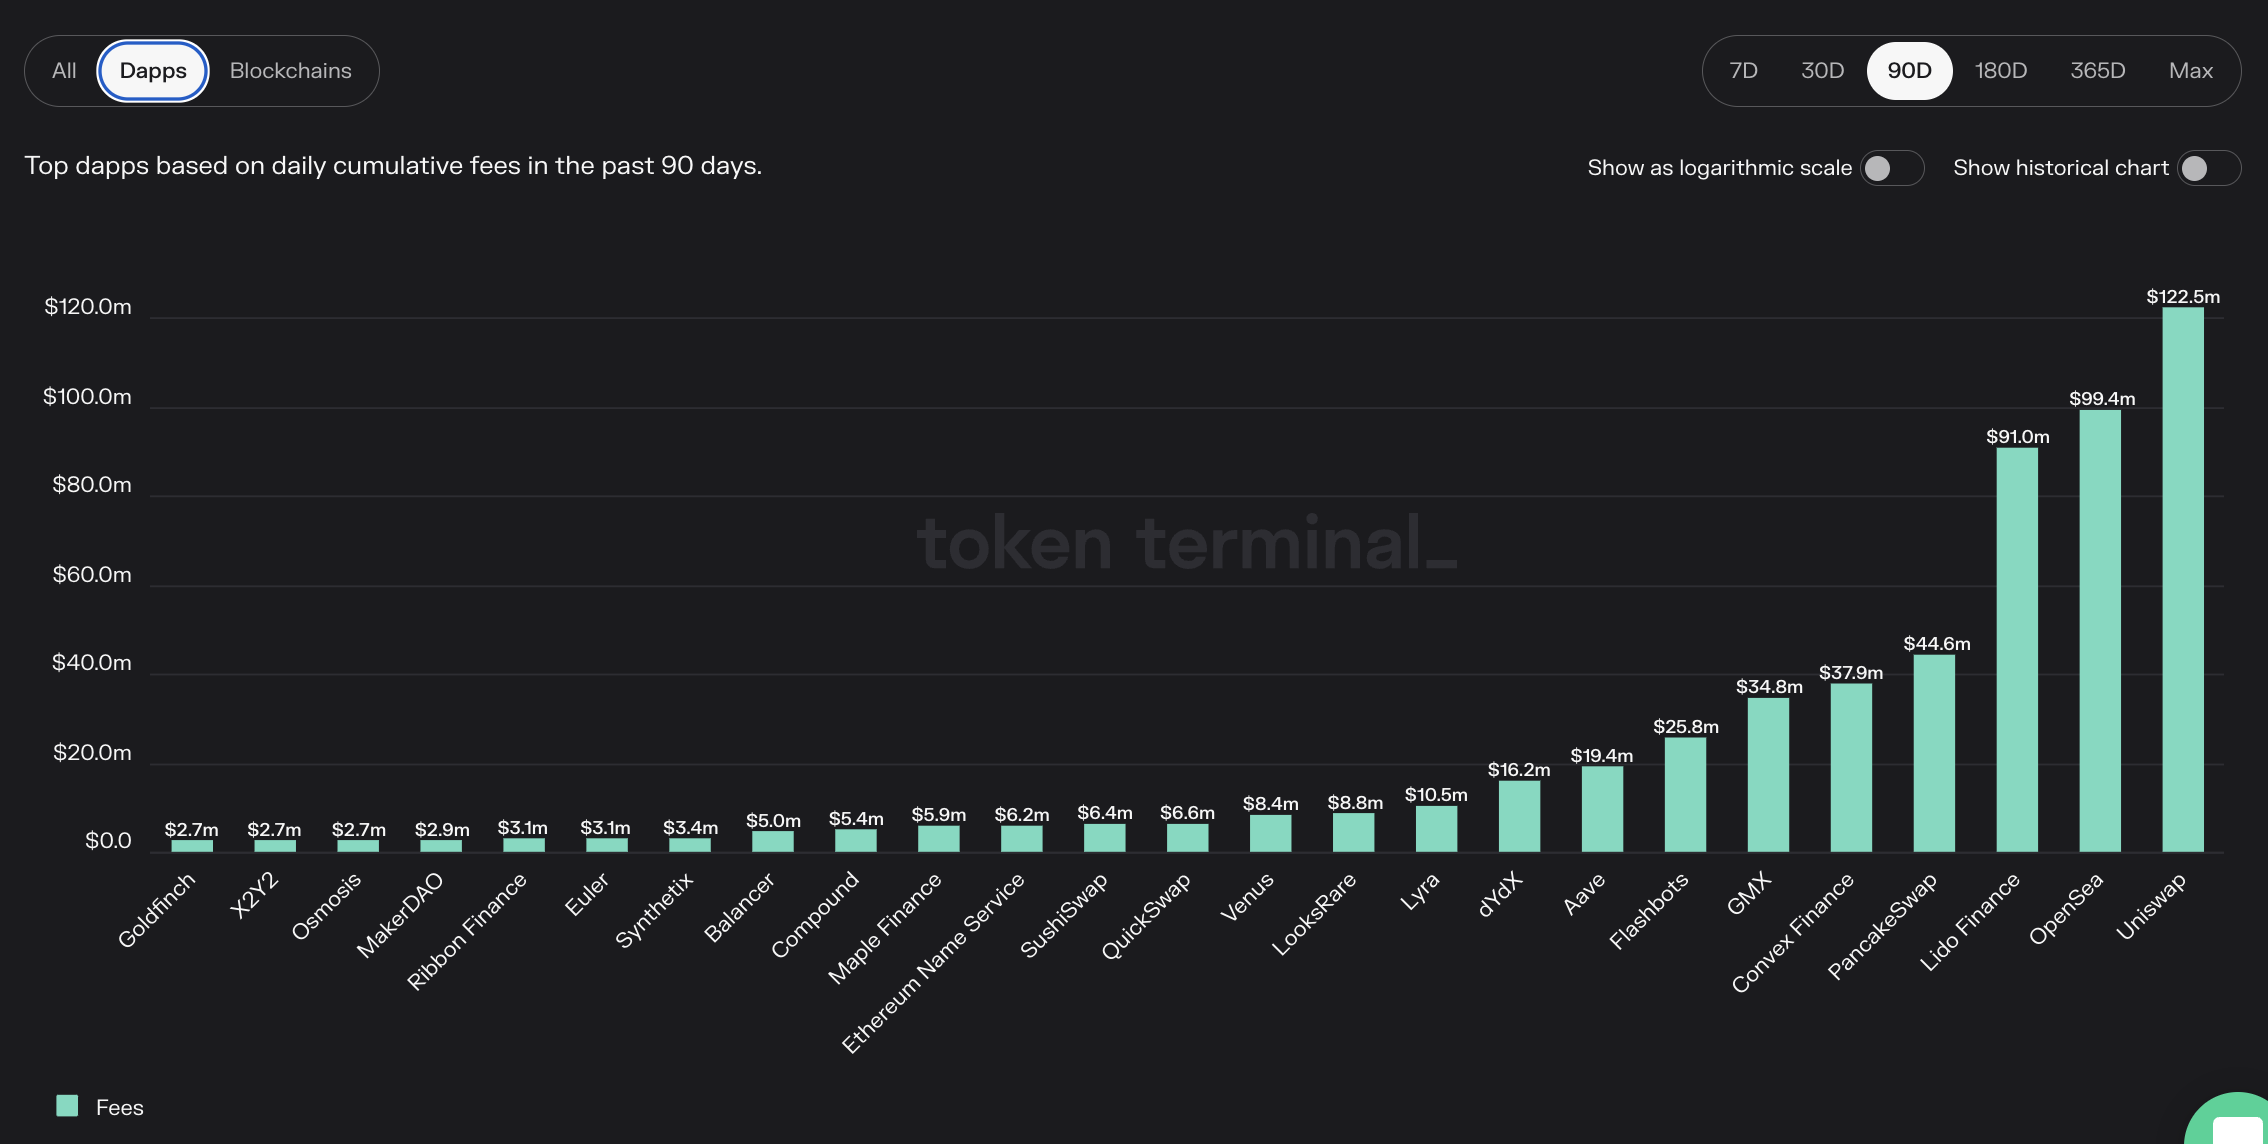 Top 20 Dapps by fee generation - Tokenterminal